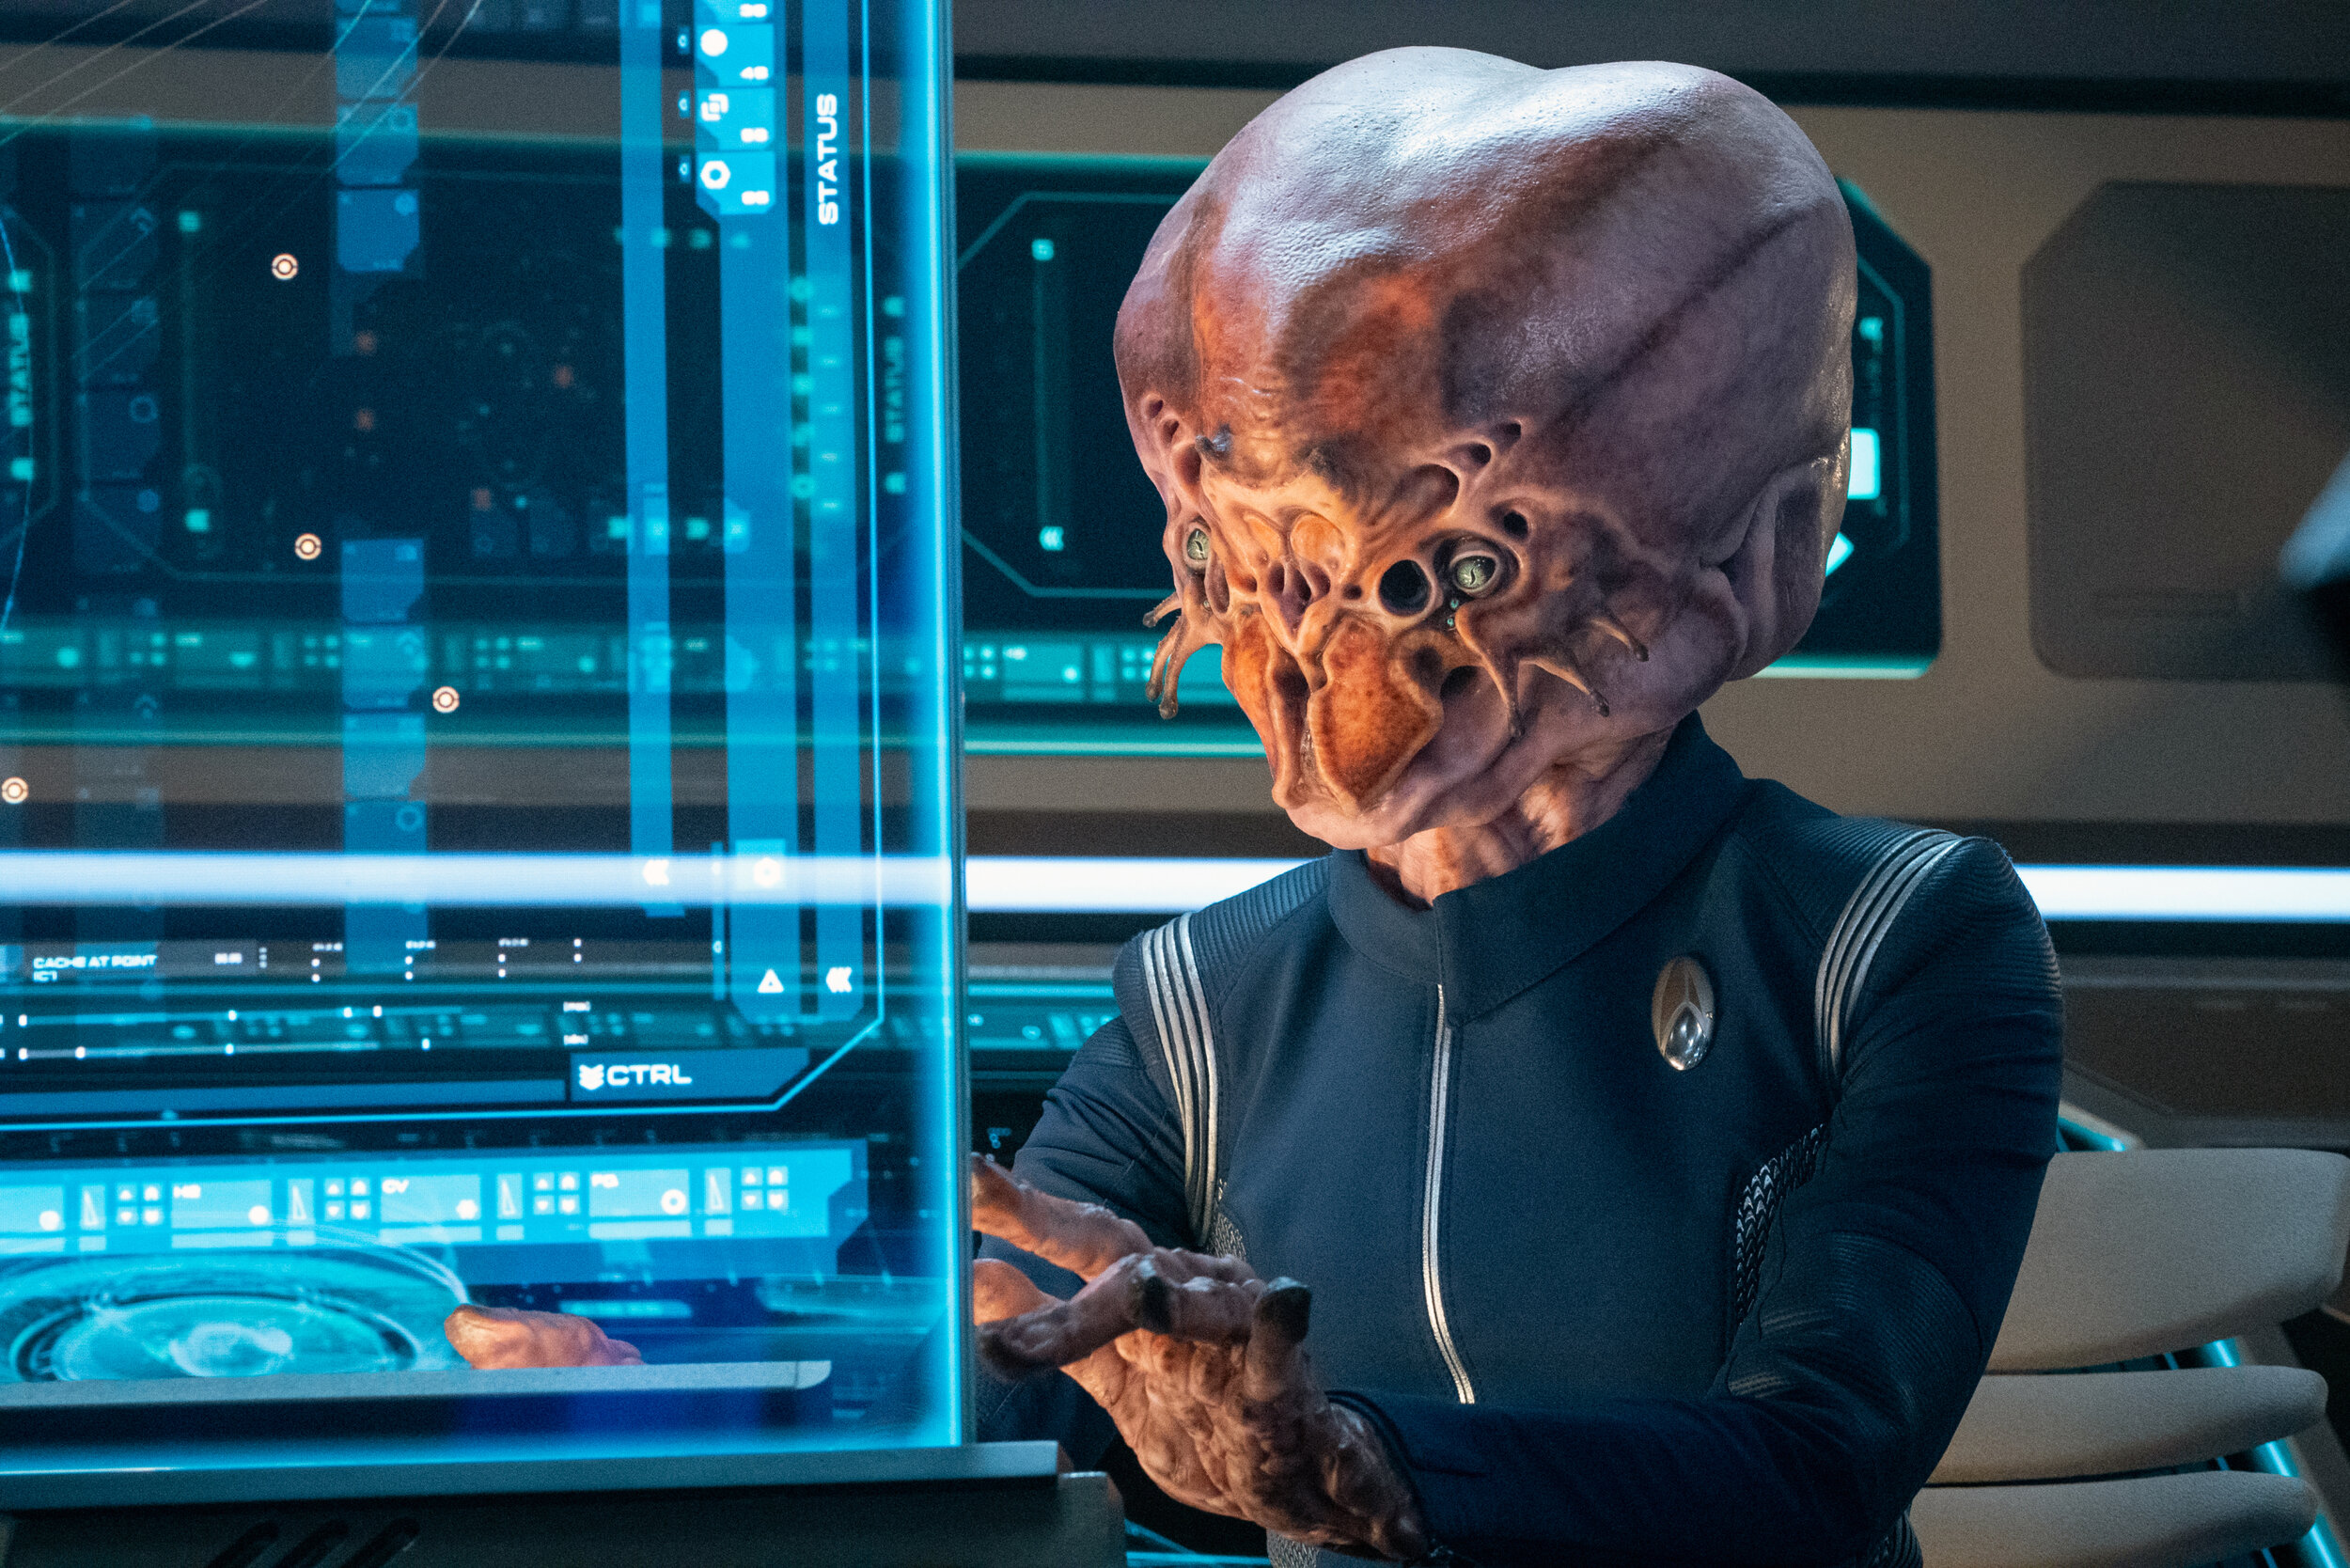   "The Sanctuary" -- Ep#308 -- Pictured: Avaah Blackwell as Osnullus of the CBS All Access series STAR TREK: DISCOVERY. Photo Cr: Michael Gibson/CBS ©2020 CBS Interactive, Inc. All Rights Reserved.  